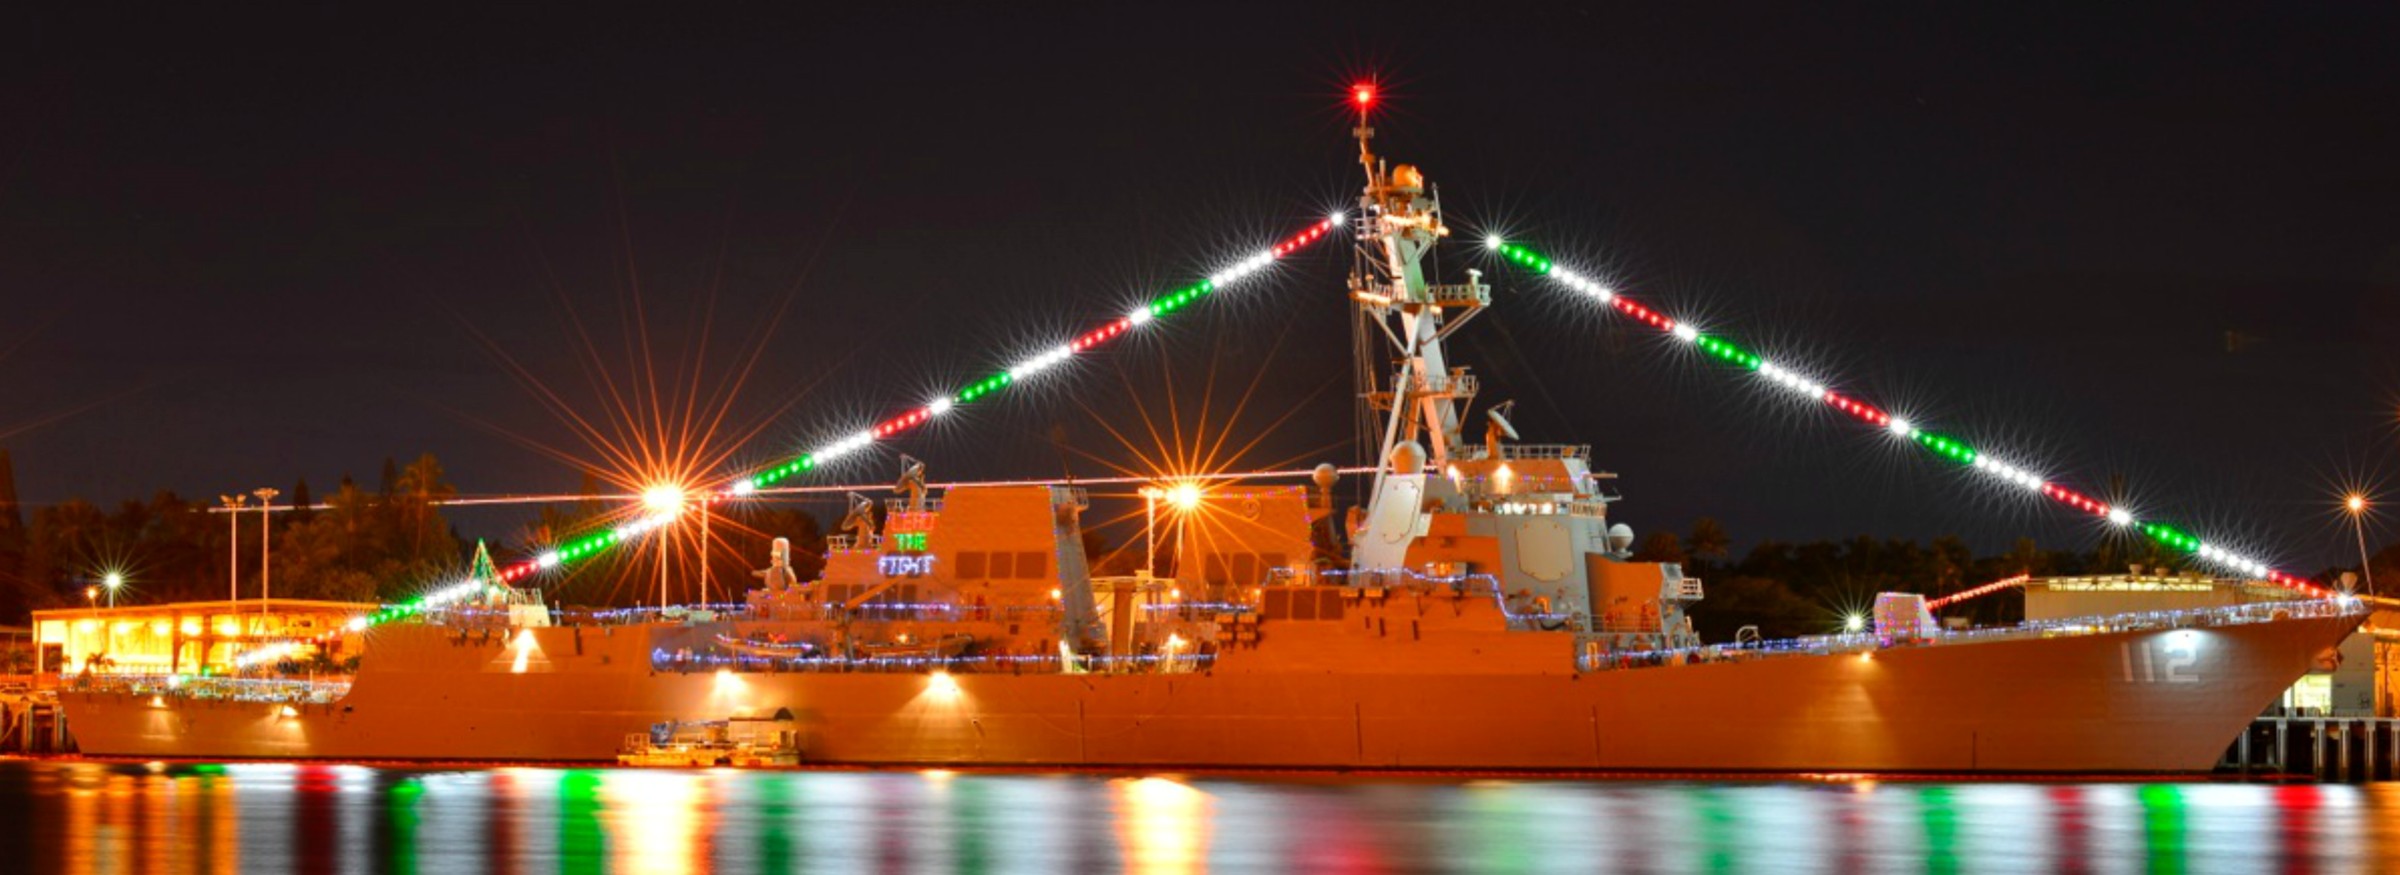 ddg-112 uss michael murphy arleigh burke class guided missile destroyer aegis us navy christmas lights 54p